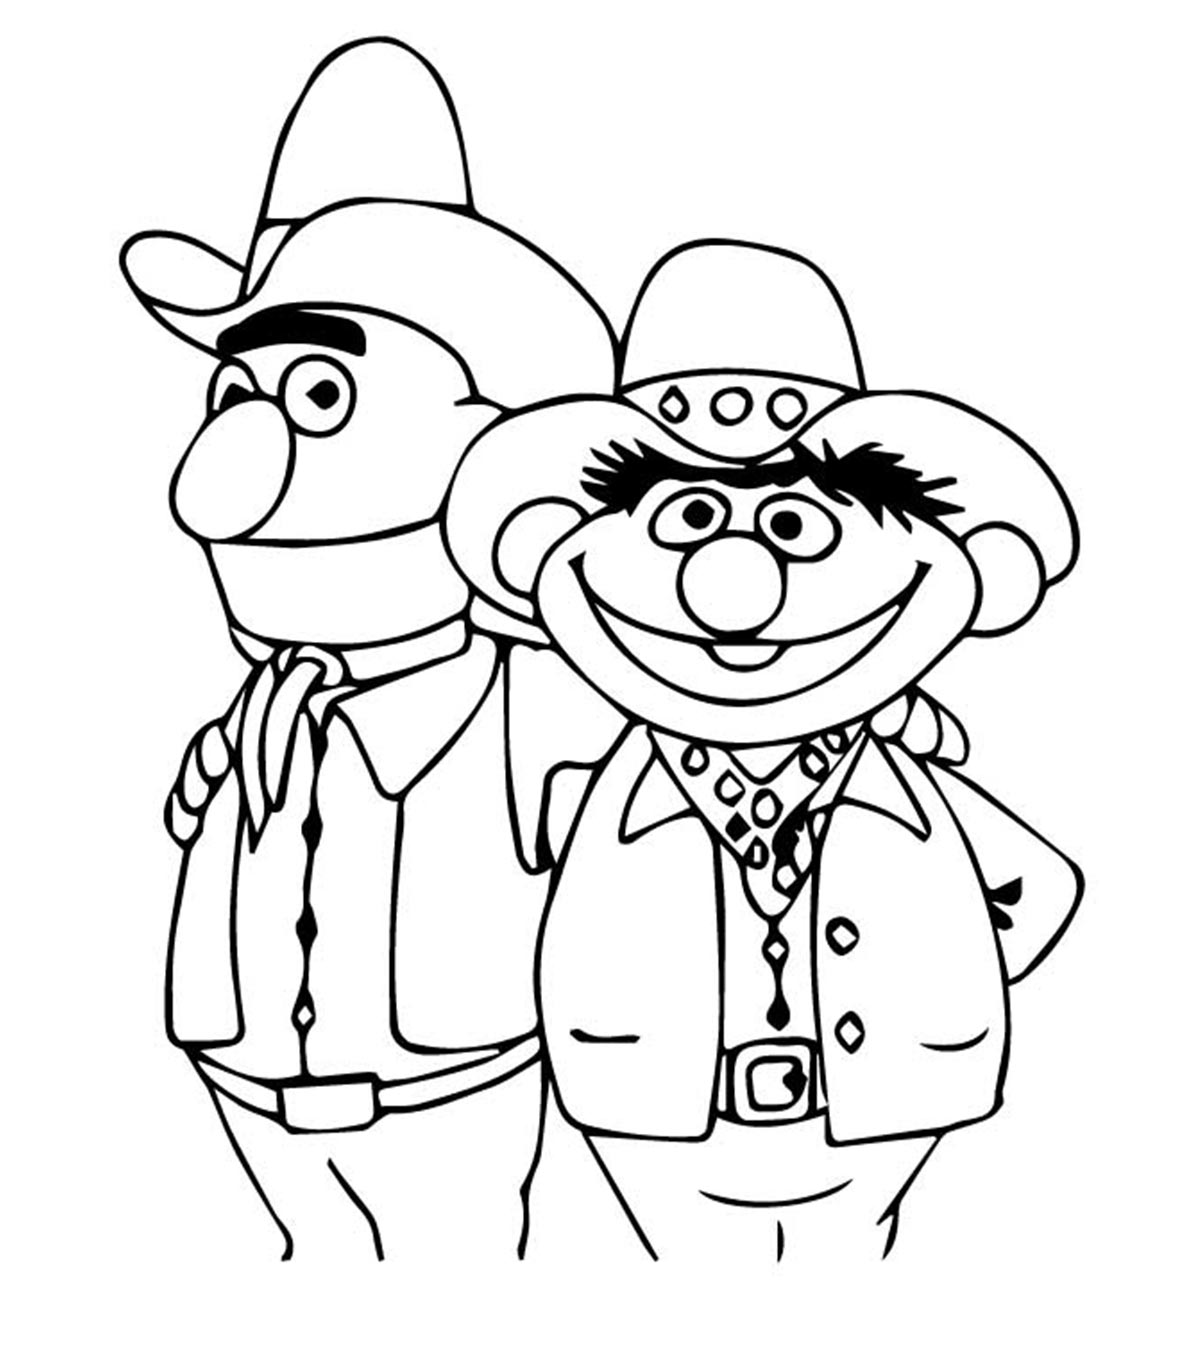 Top 15 Sesame Street Coloring Pages For Your Toddler 1 